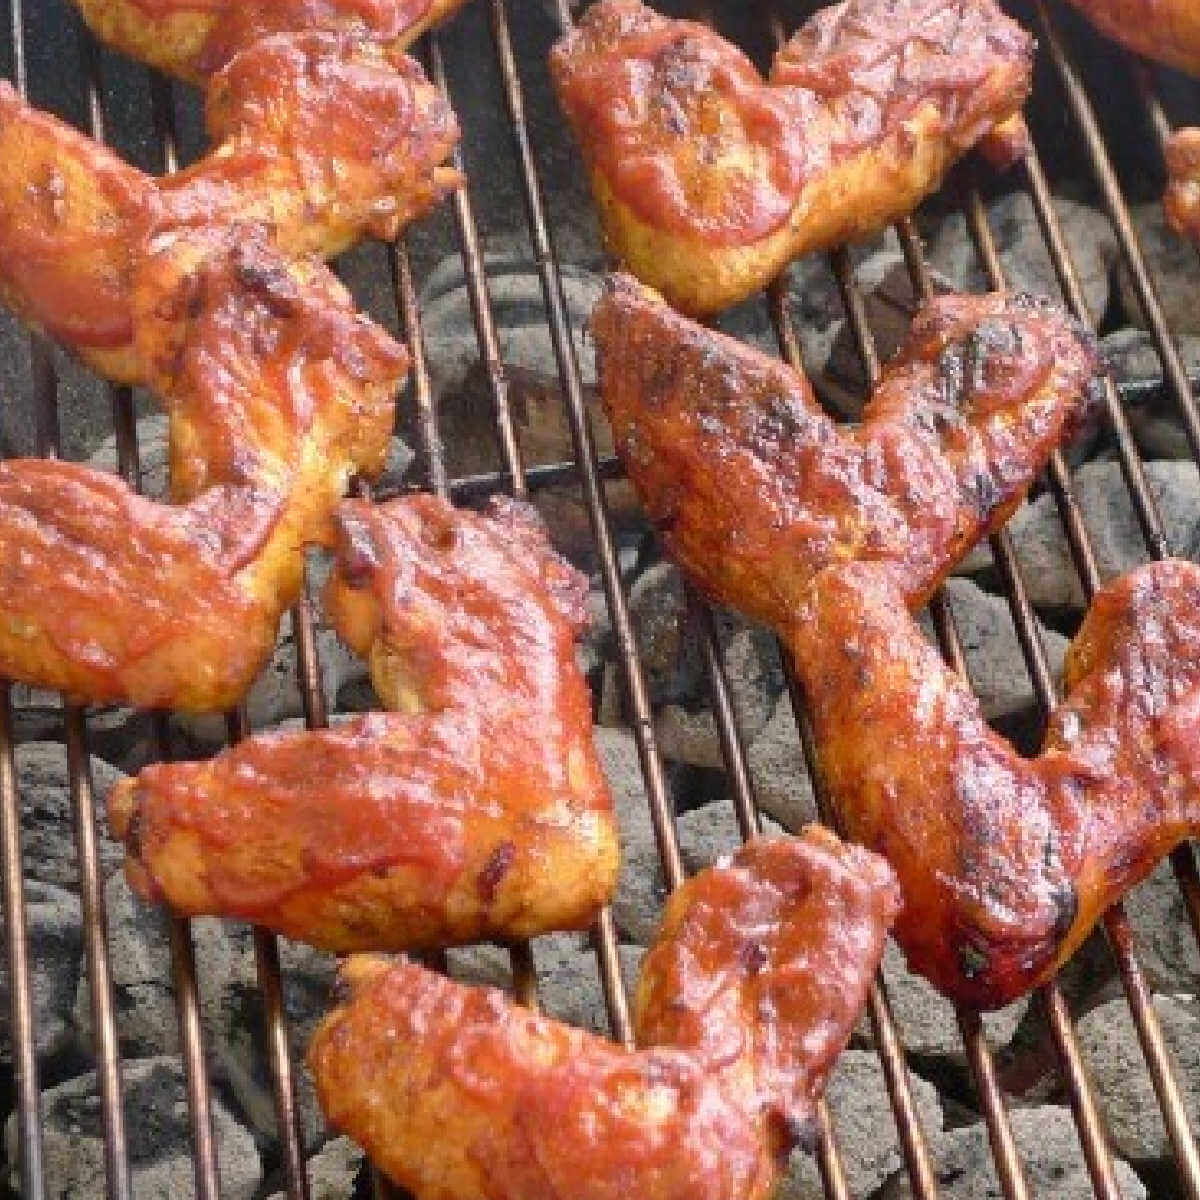 Spicy Barbecued Chicken Wings | A Step by Step Recipe Tutorial